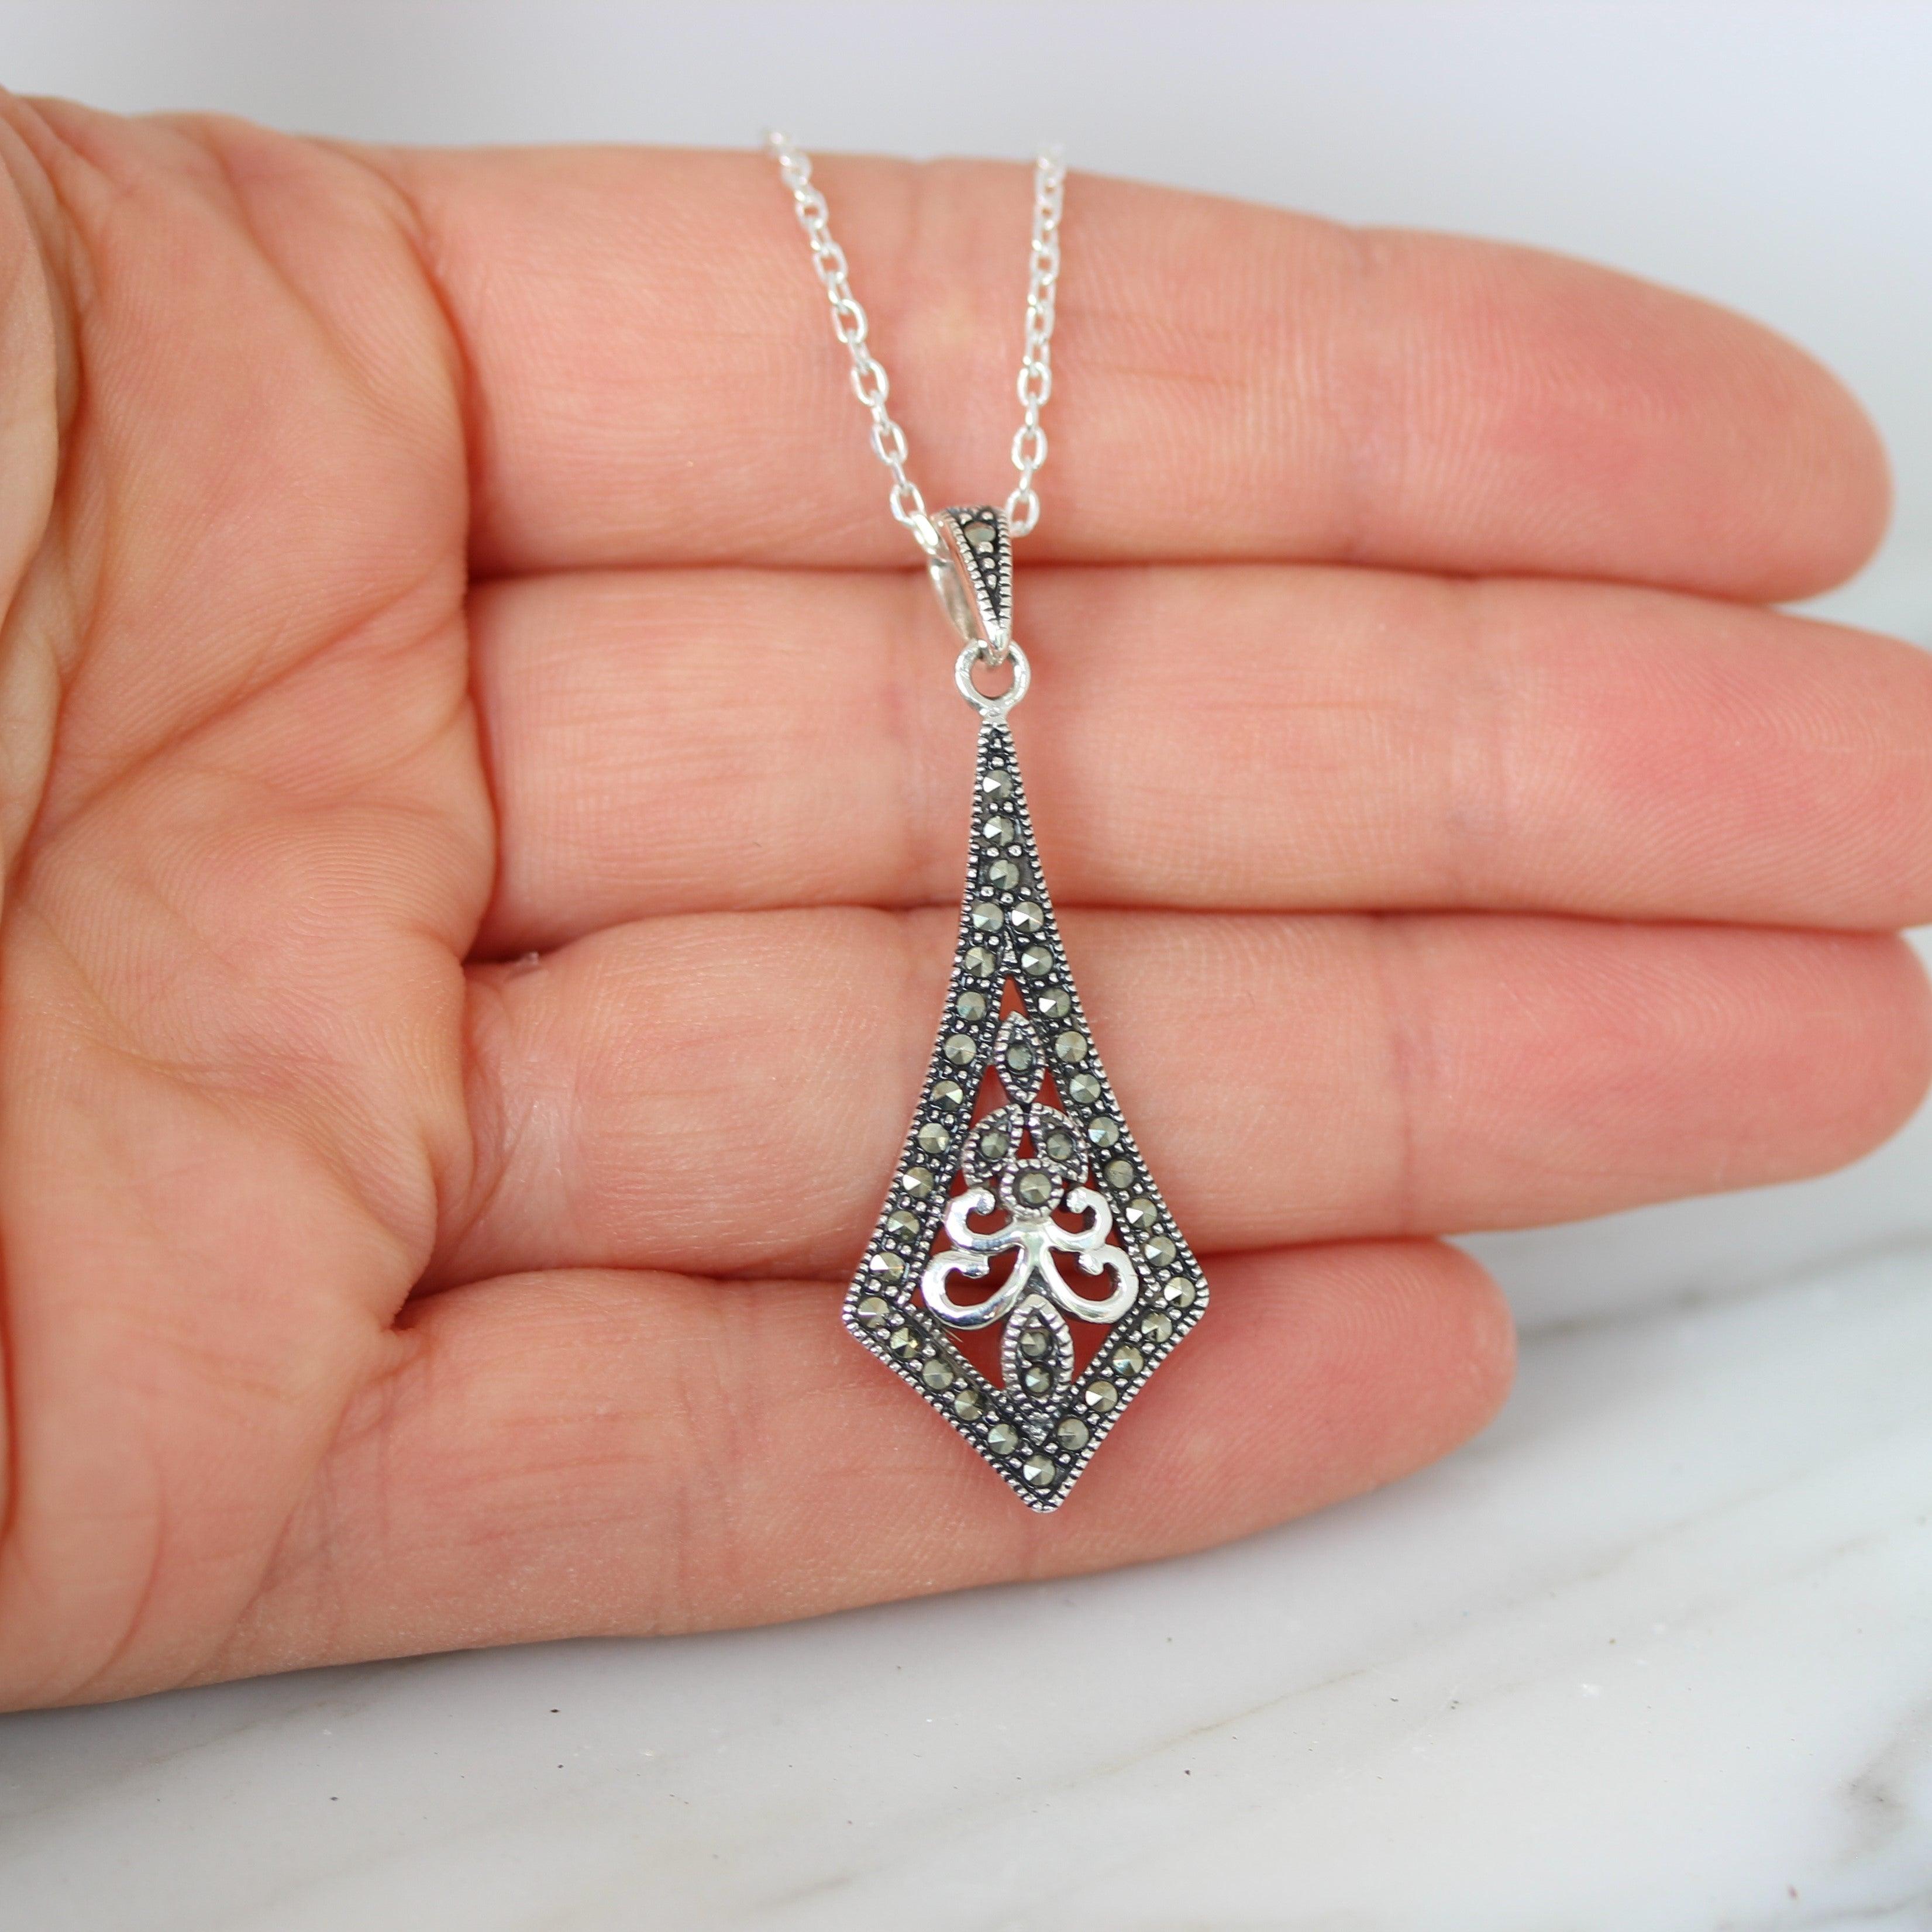 Sterling Silver Marcasite & Kite Shape Pendant Necklace - STERLING SILVER DESIGNS